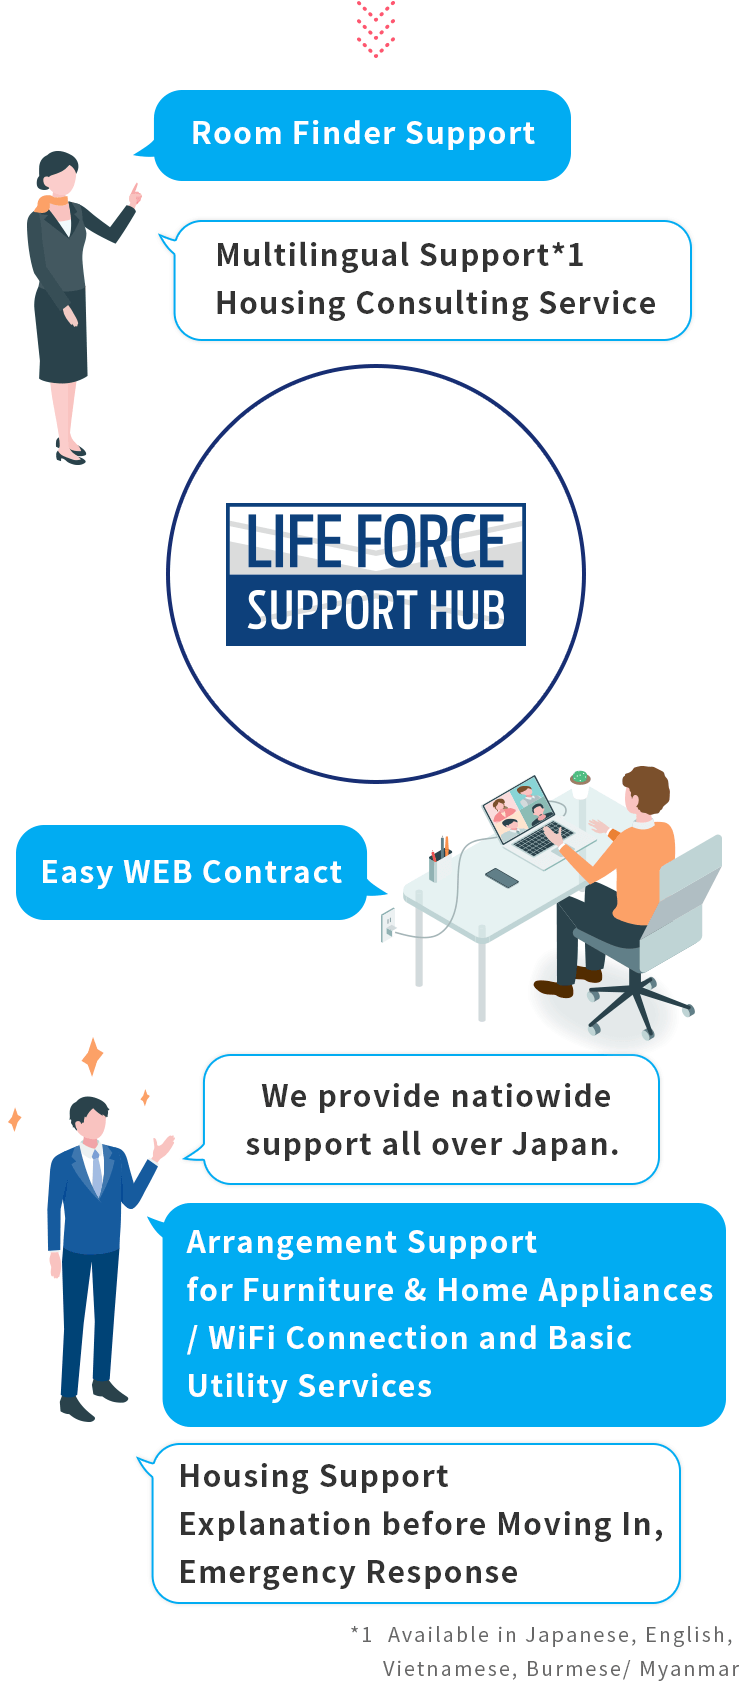 LIFE FORCE SUPPORT HUB